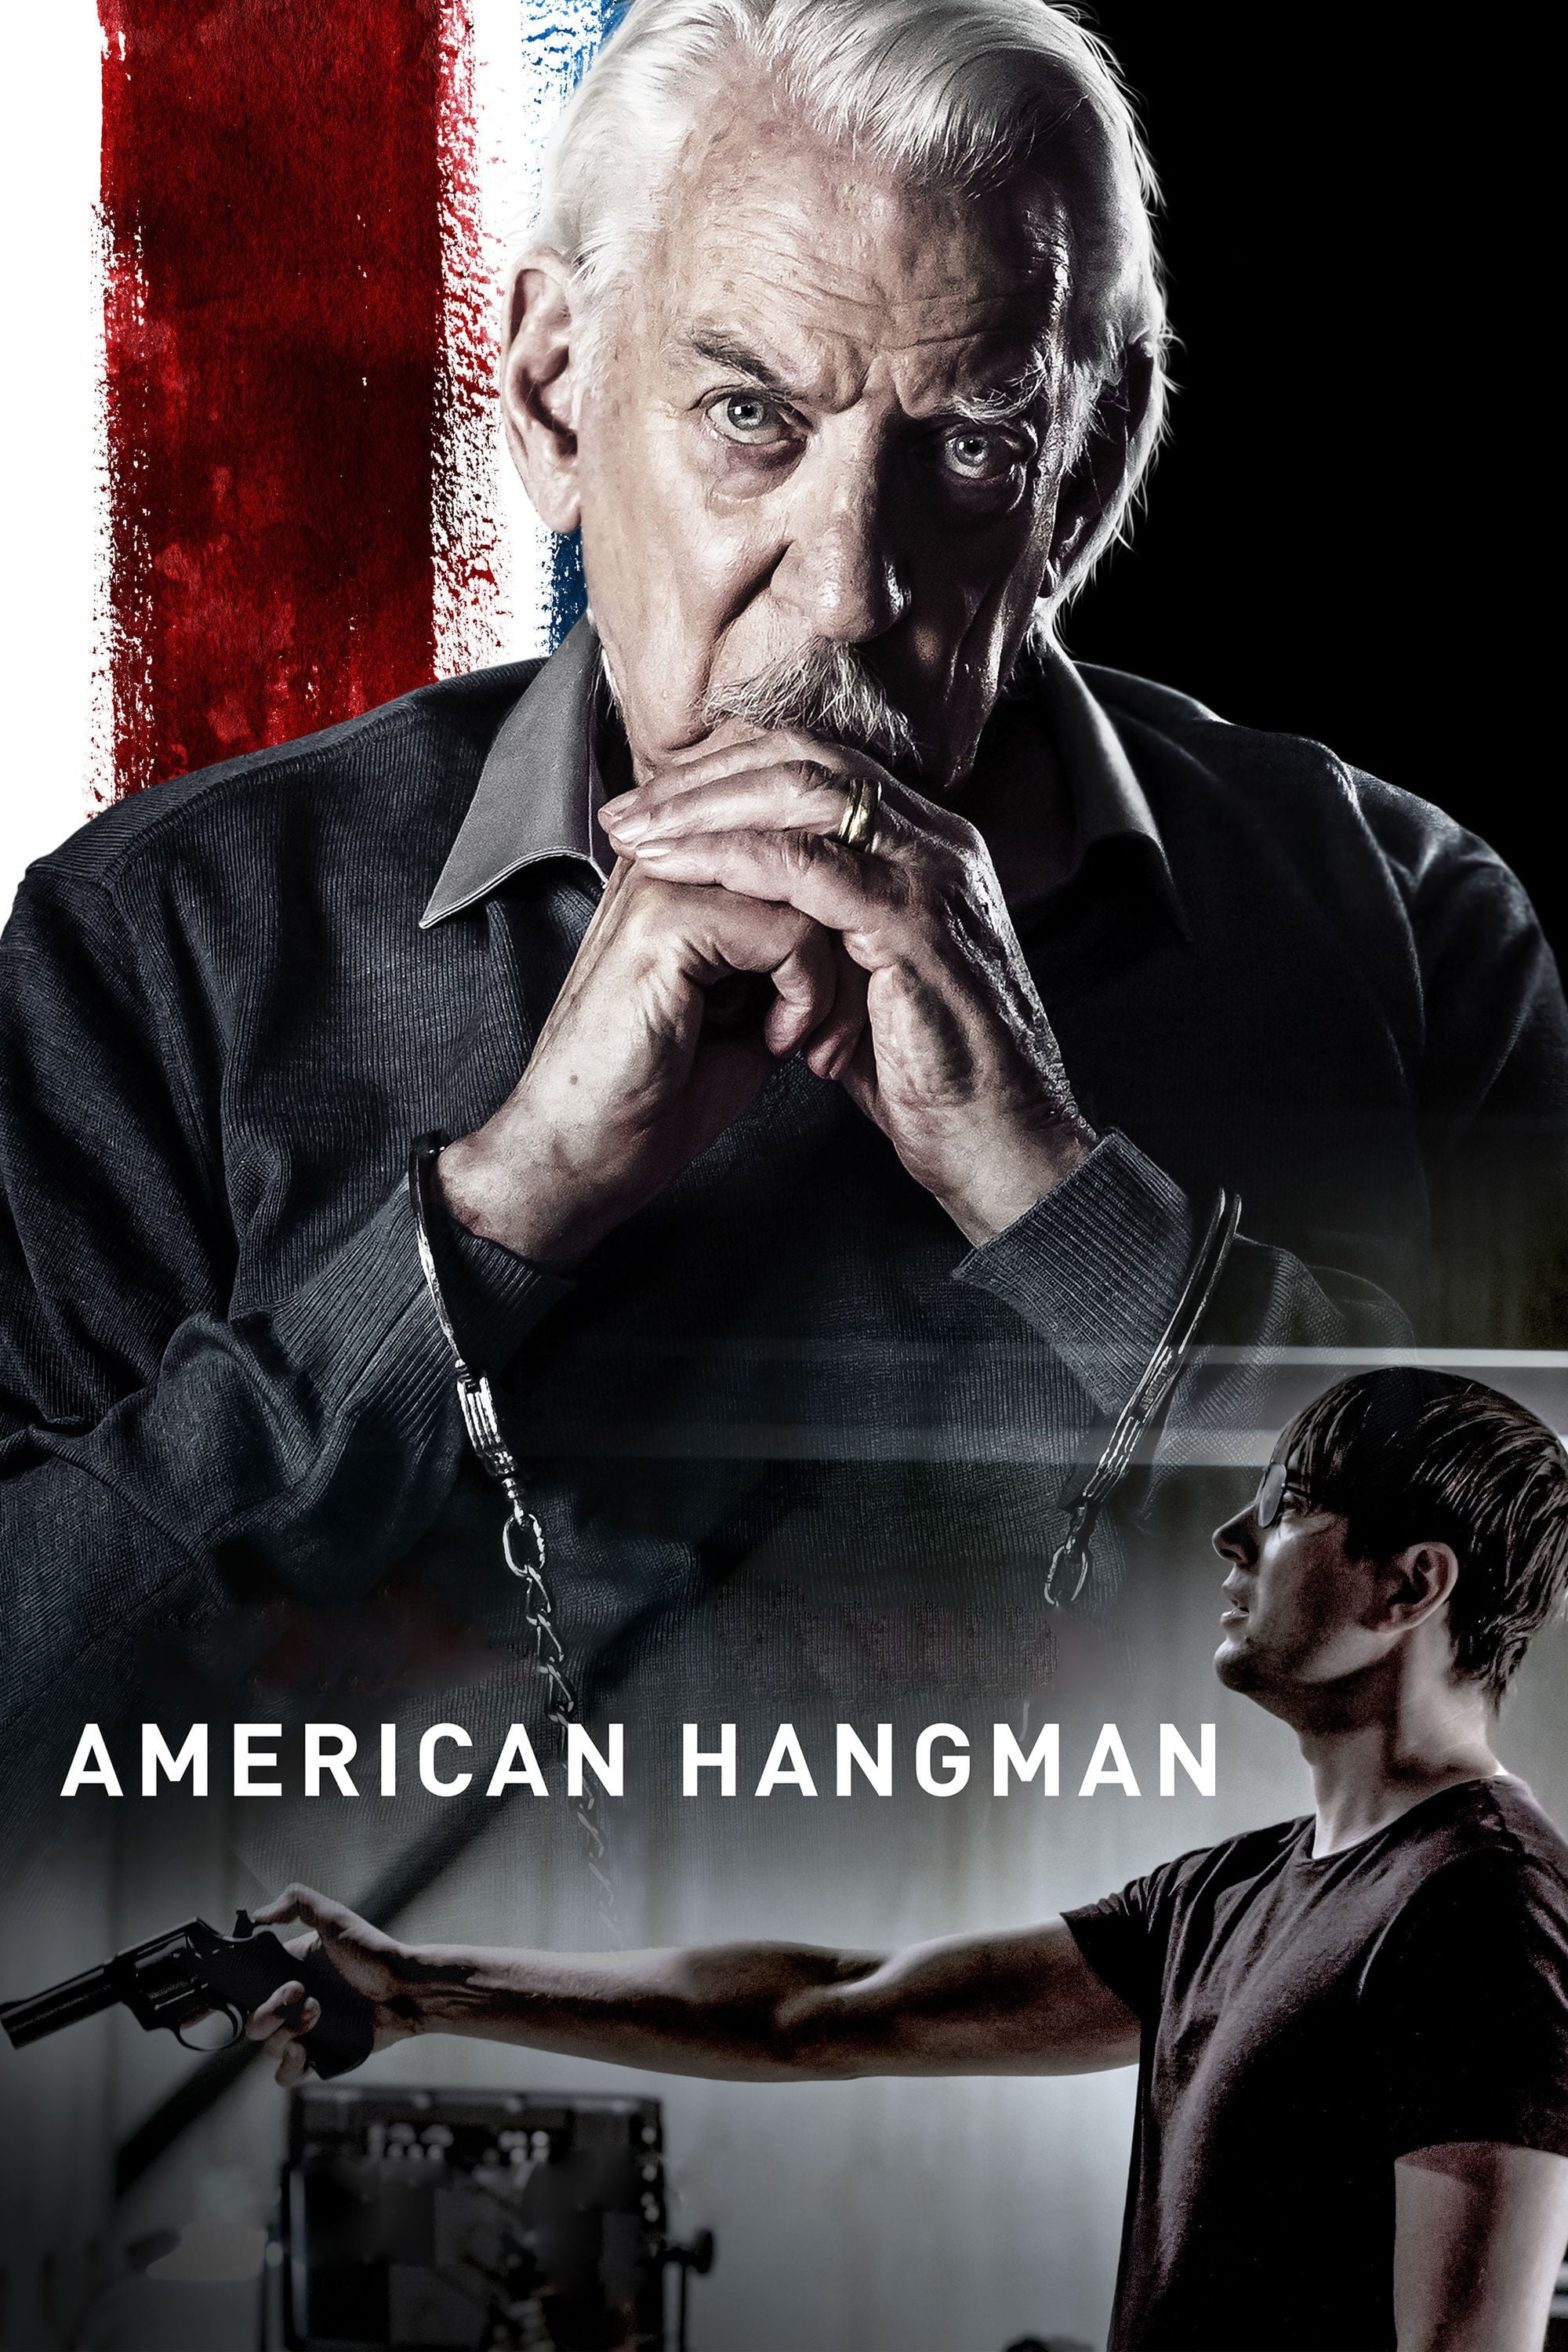 Poster for the movie "American Hangman"